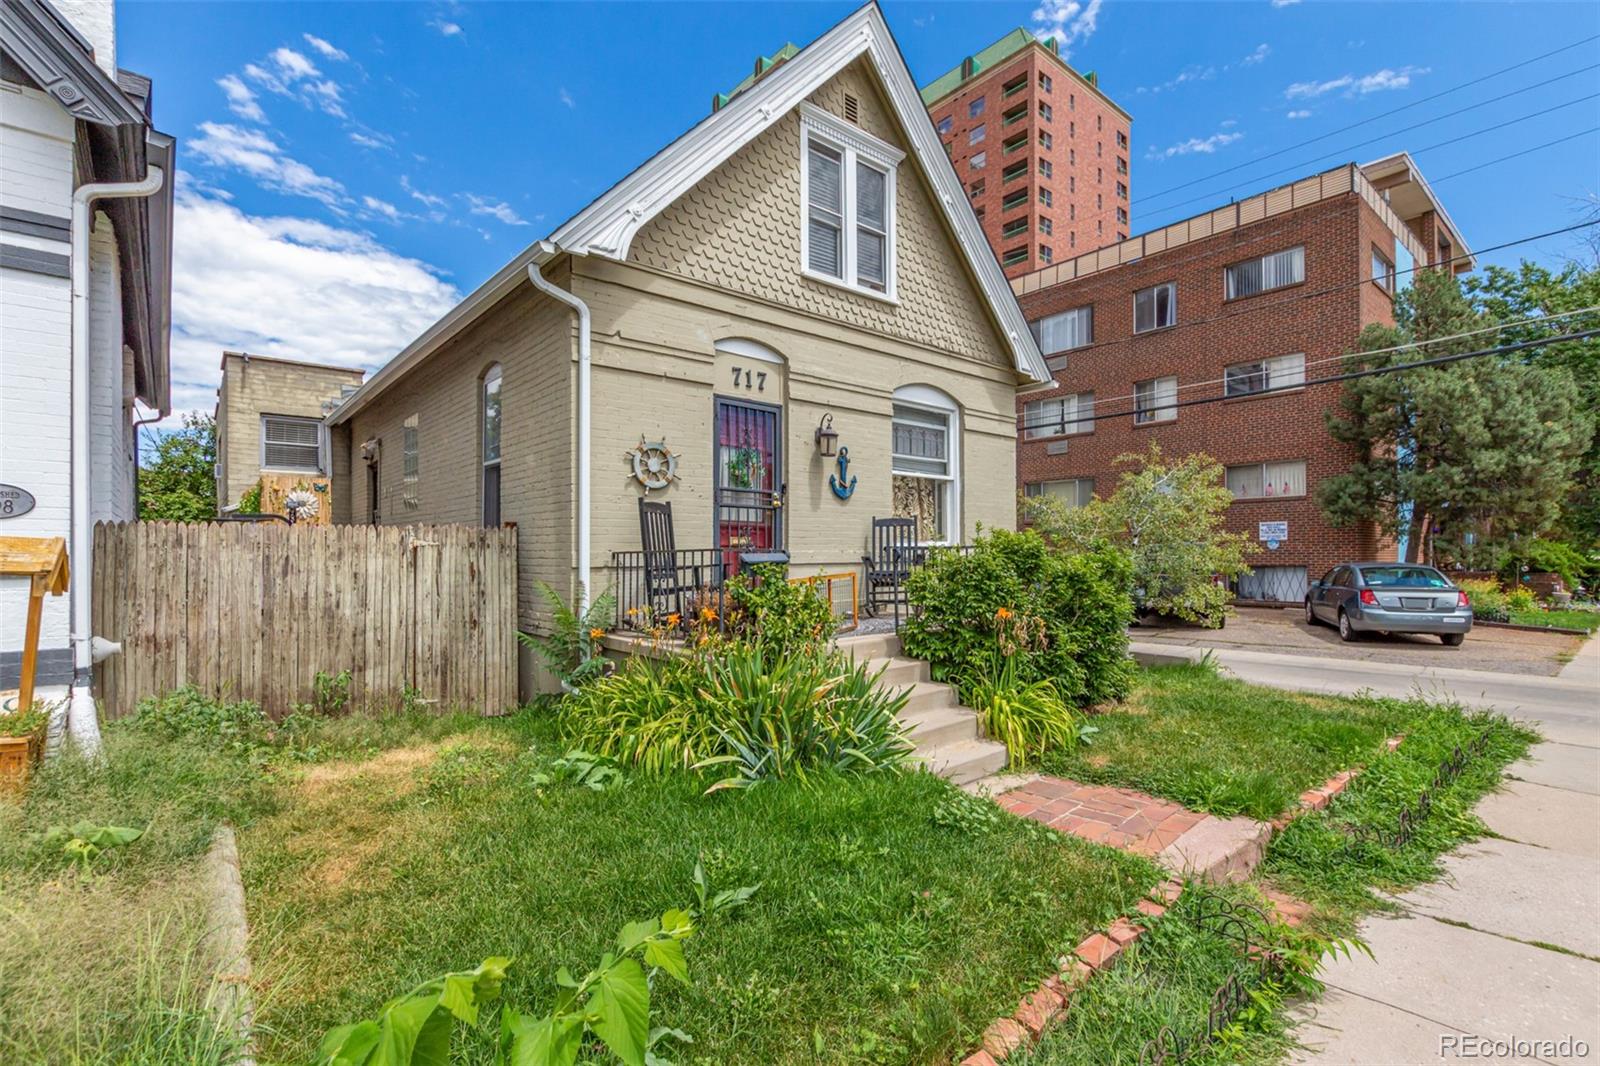 717 e 1st avenue, Denver sold home. Closed on 2024-02-09 for $720,000.